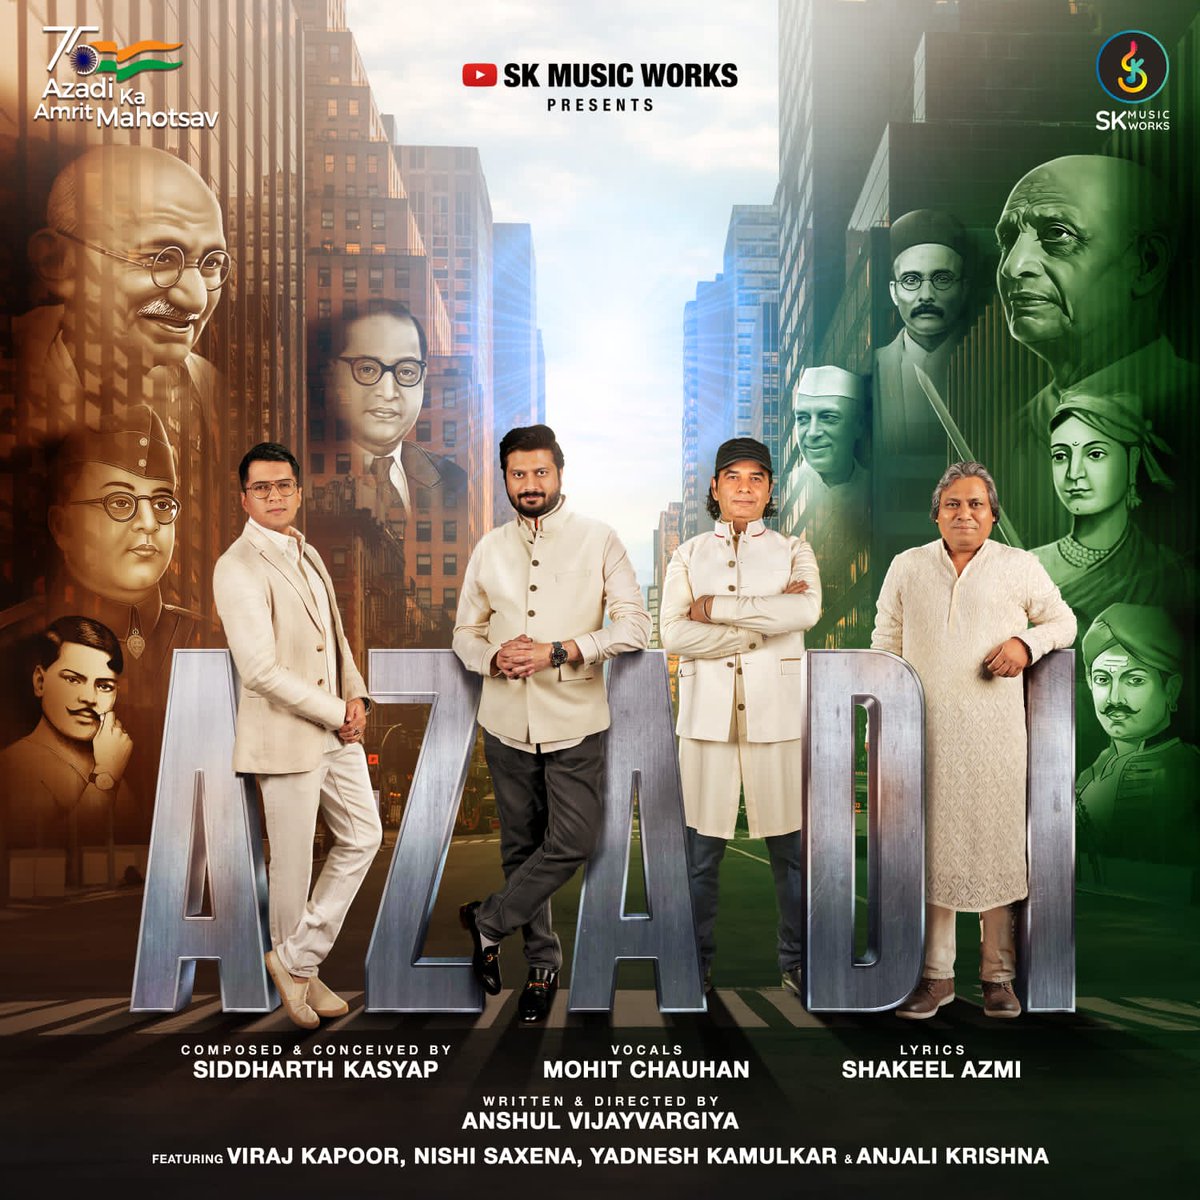 The Vibes of this song is awesome I am really surprised to listen this at first
@skmusicworks #AzadiBySKMusicWorks